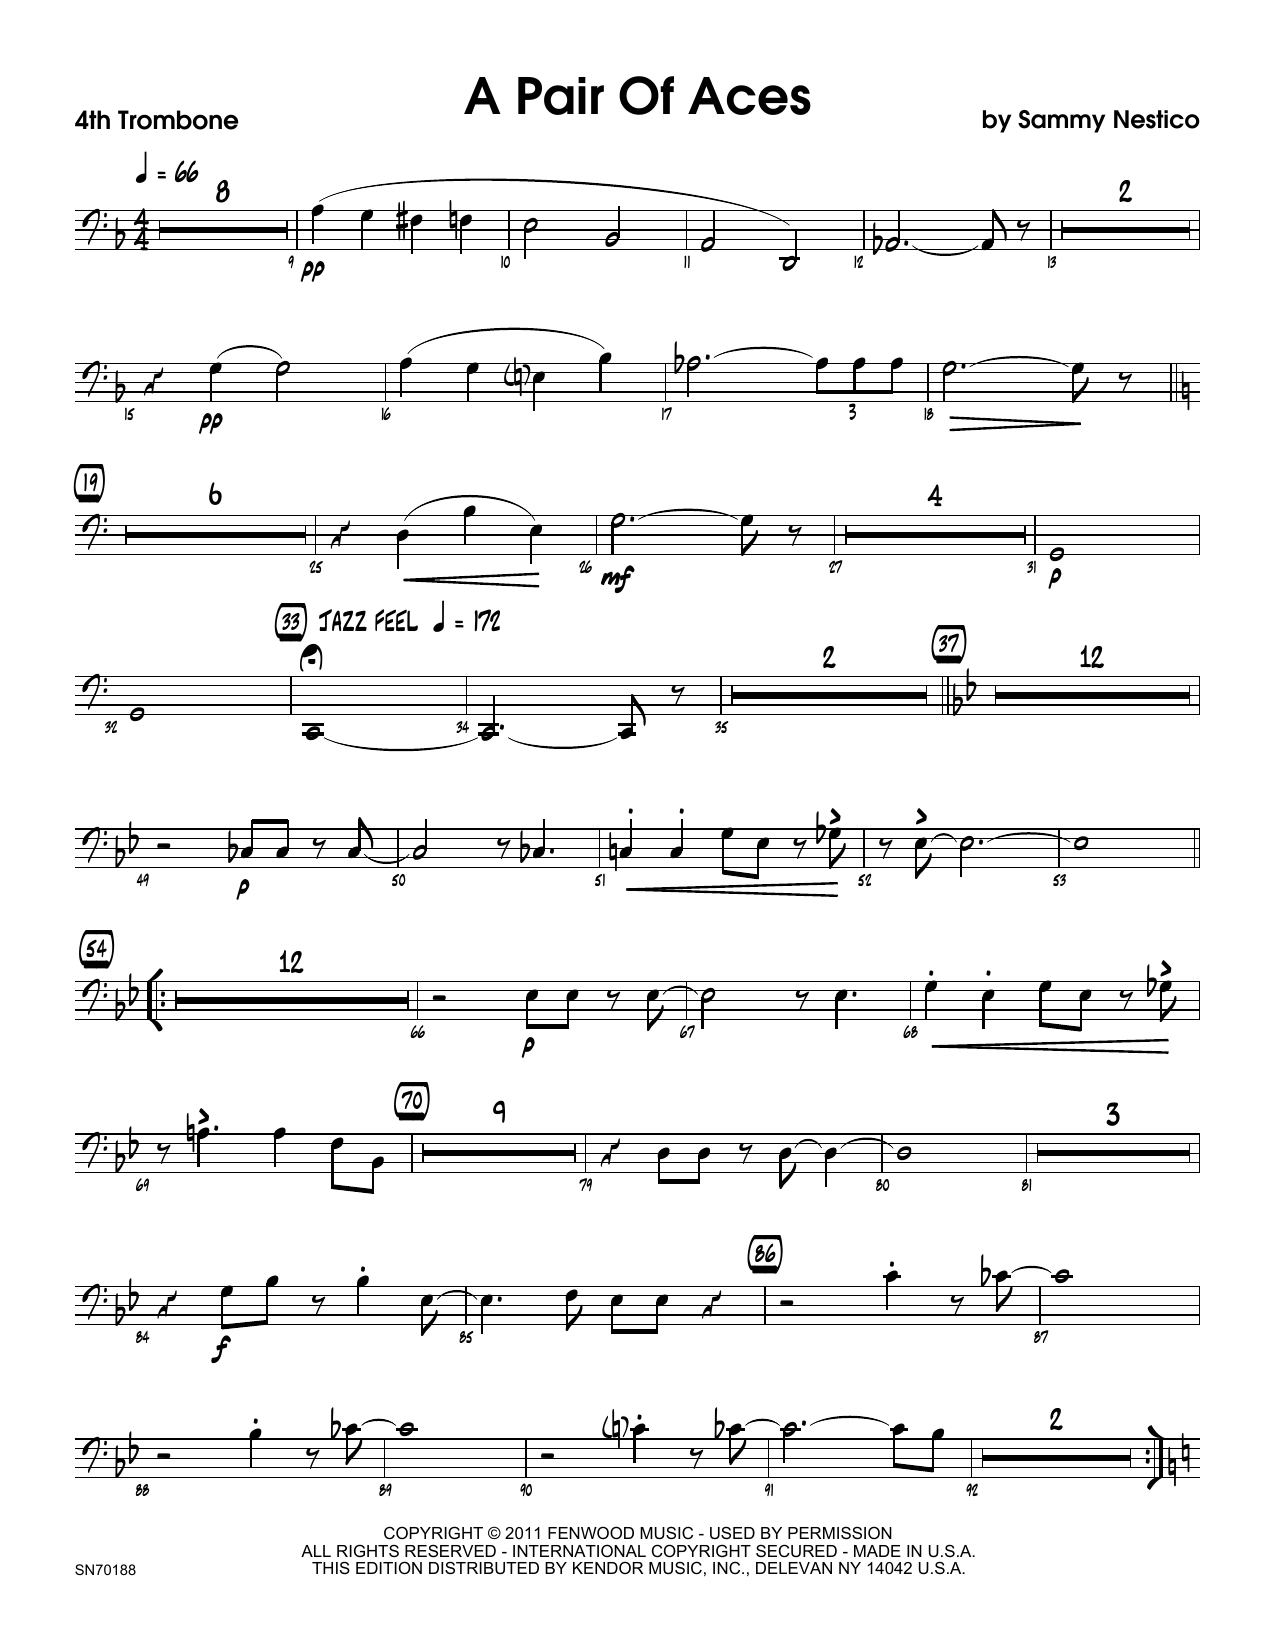 Download Sammy Nestico A Pair Of Aces - 4th Trombone Sheet Music